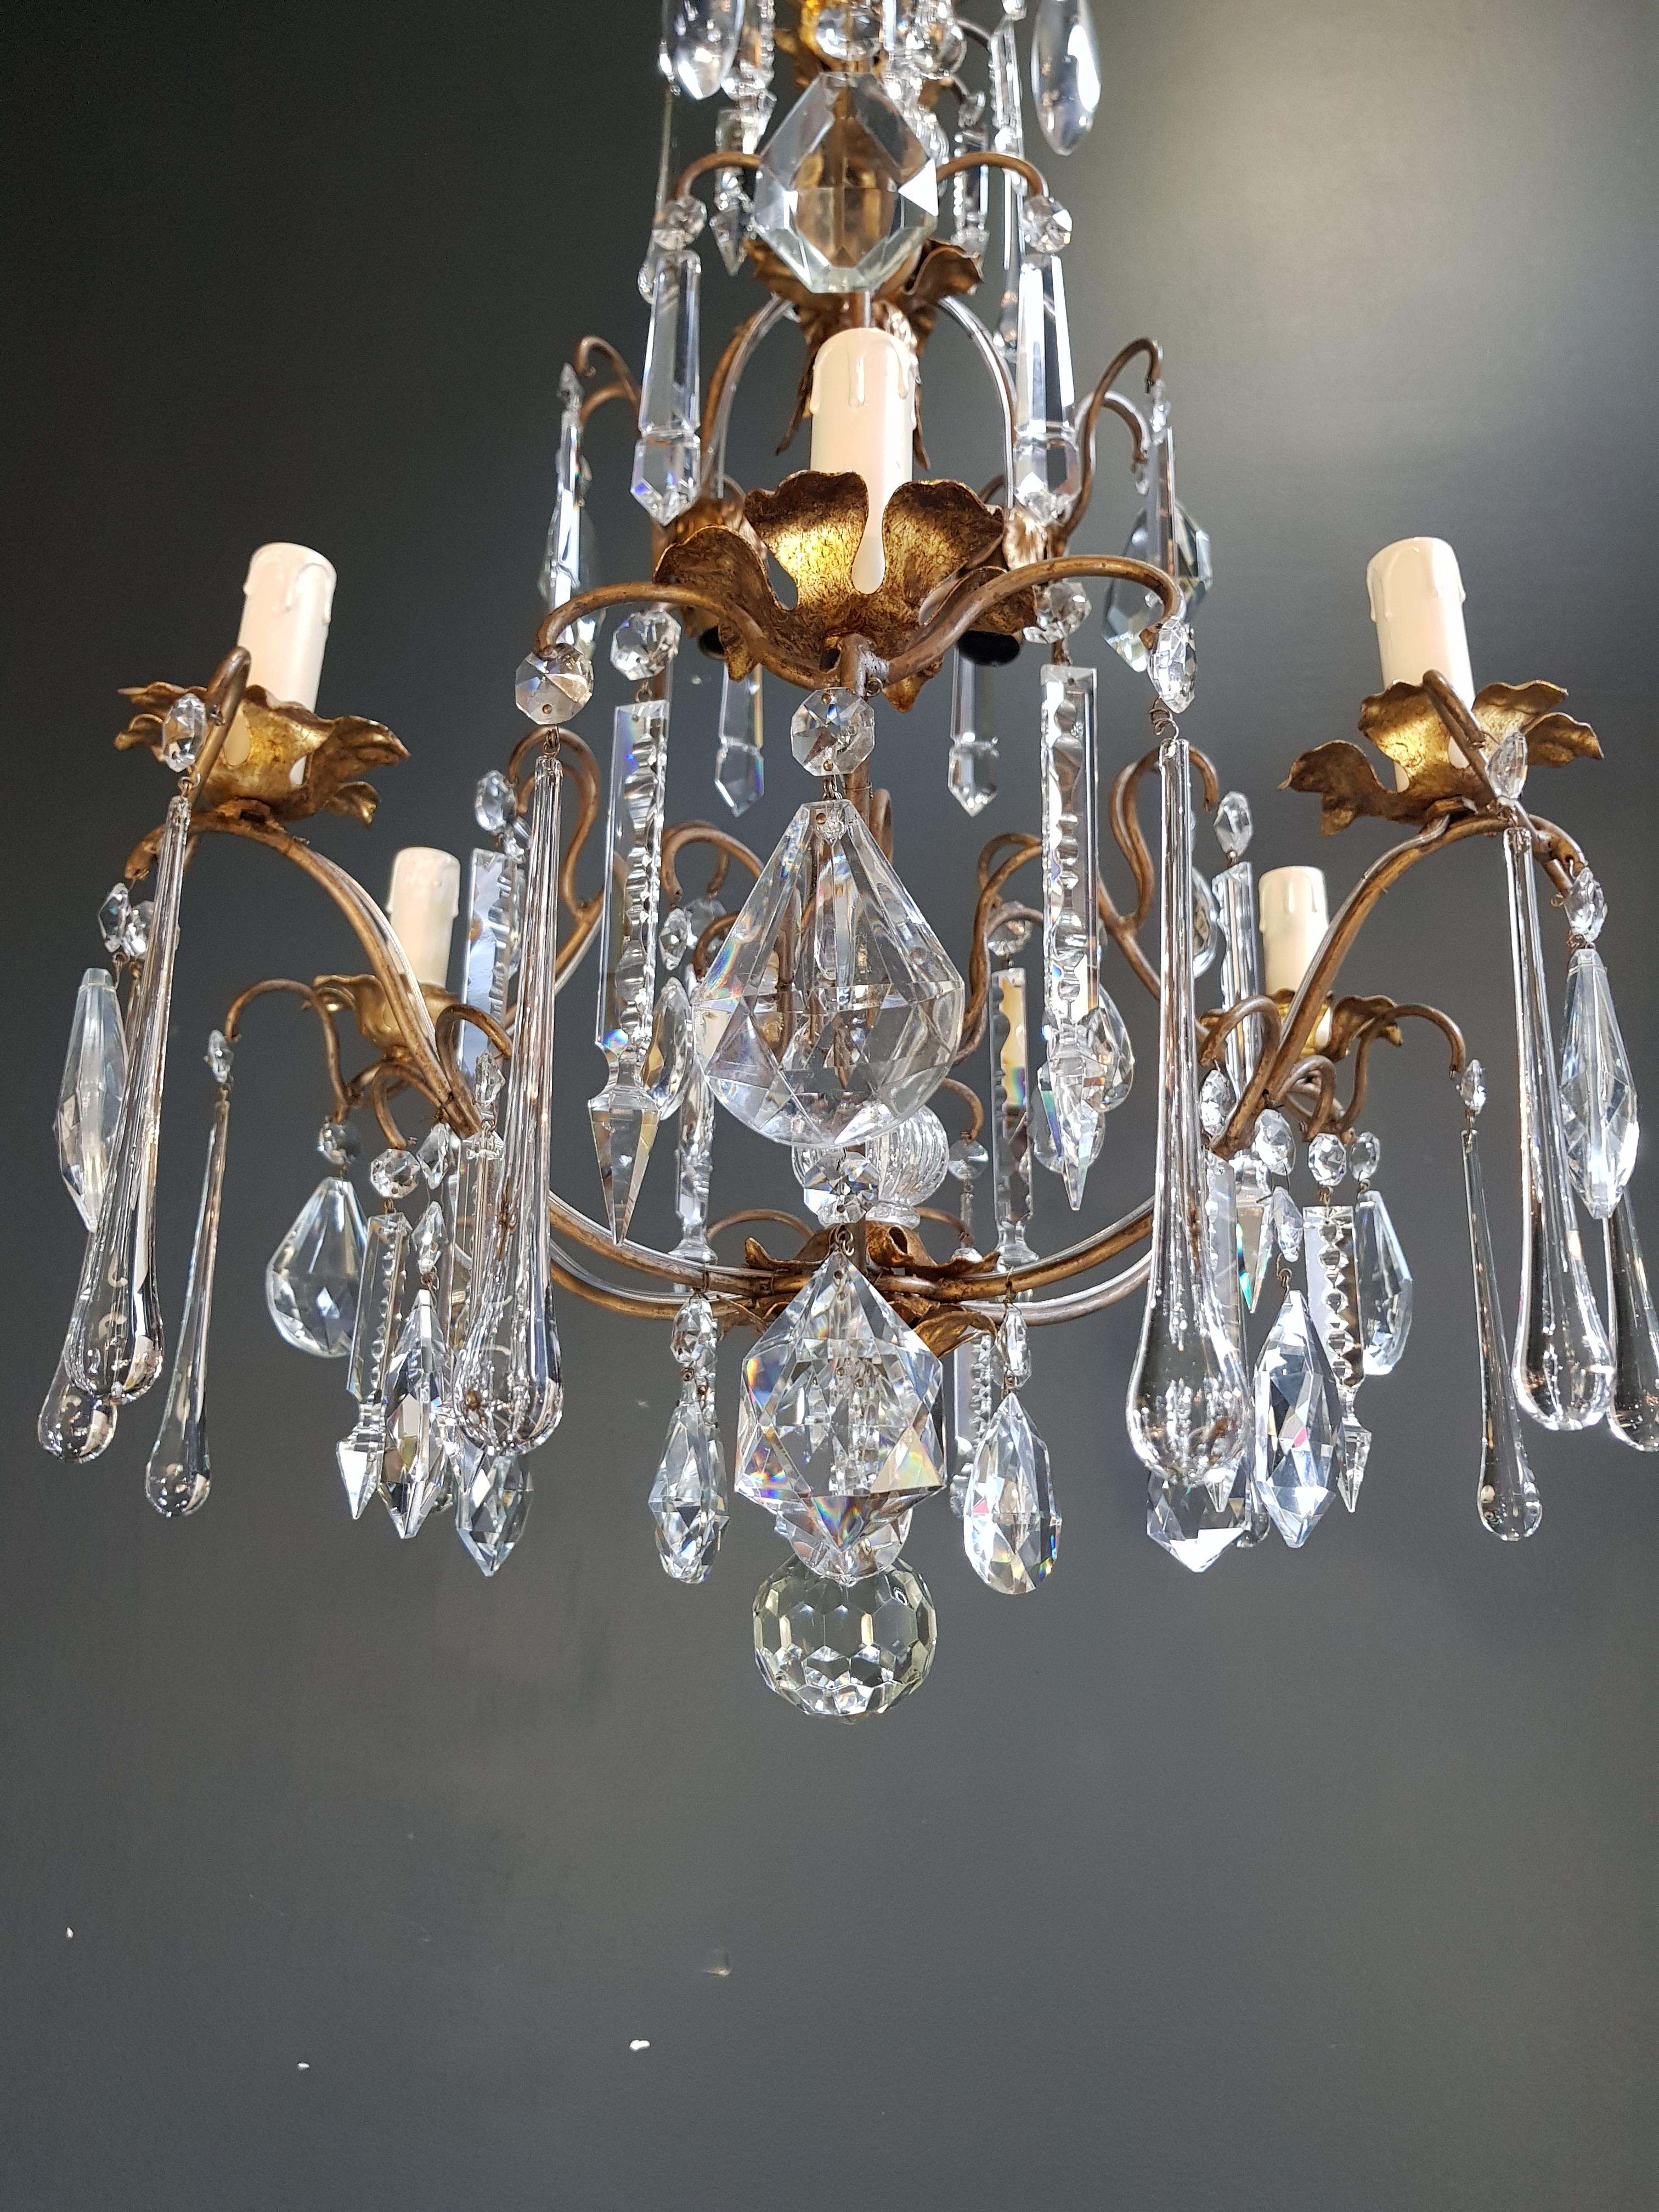 Preserved Vintage Chandelier: A Glimpse into 1950s Elegance

Step back in time with our authentic circa 1950 chandelier that has been meticulously preserved. With renewed cabling and sockets, and its crystal elements lovingly hand-knotted, this